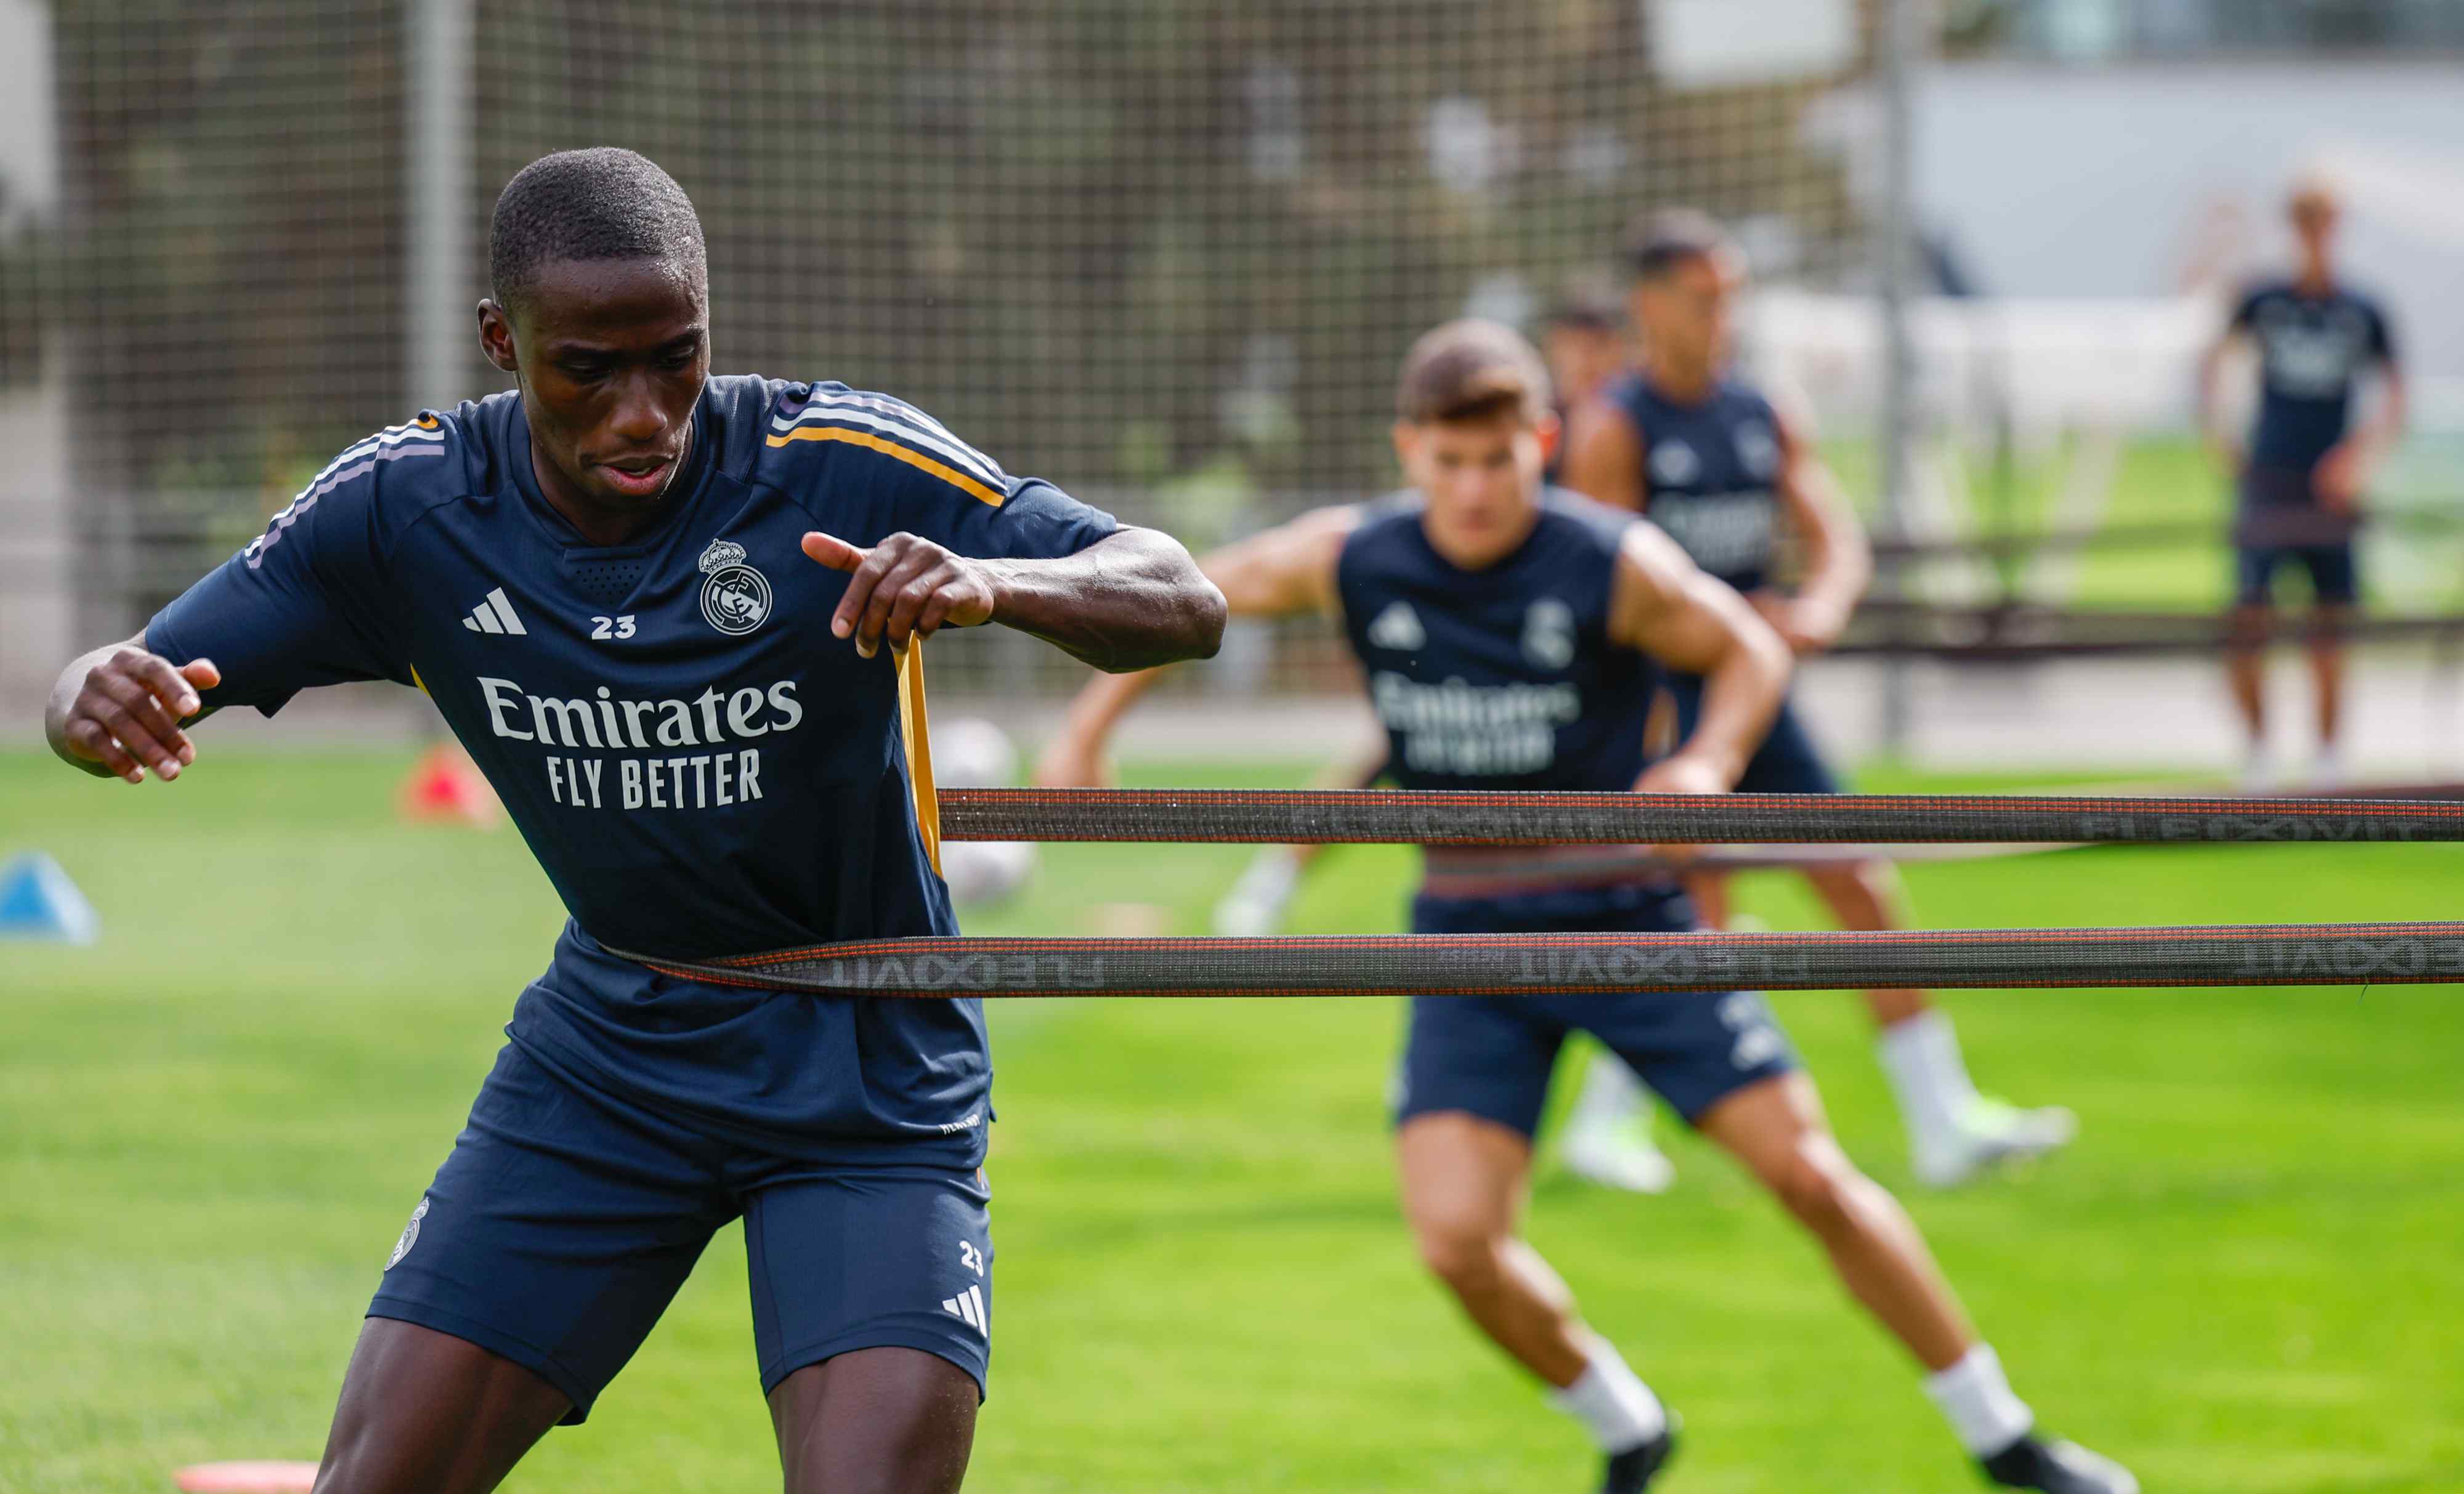 Real Madrid defender could be in line for shock renewal as Carlo Ancelotti trust pays dividends